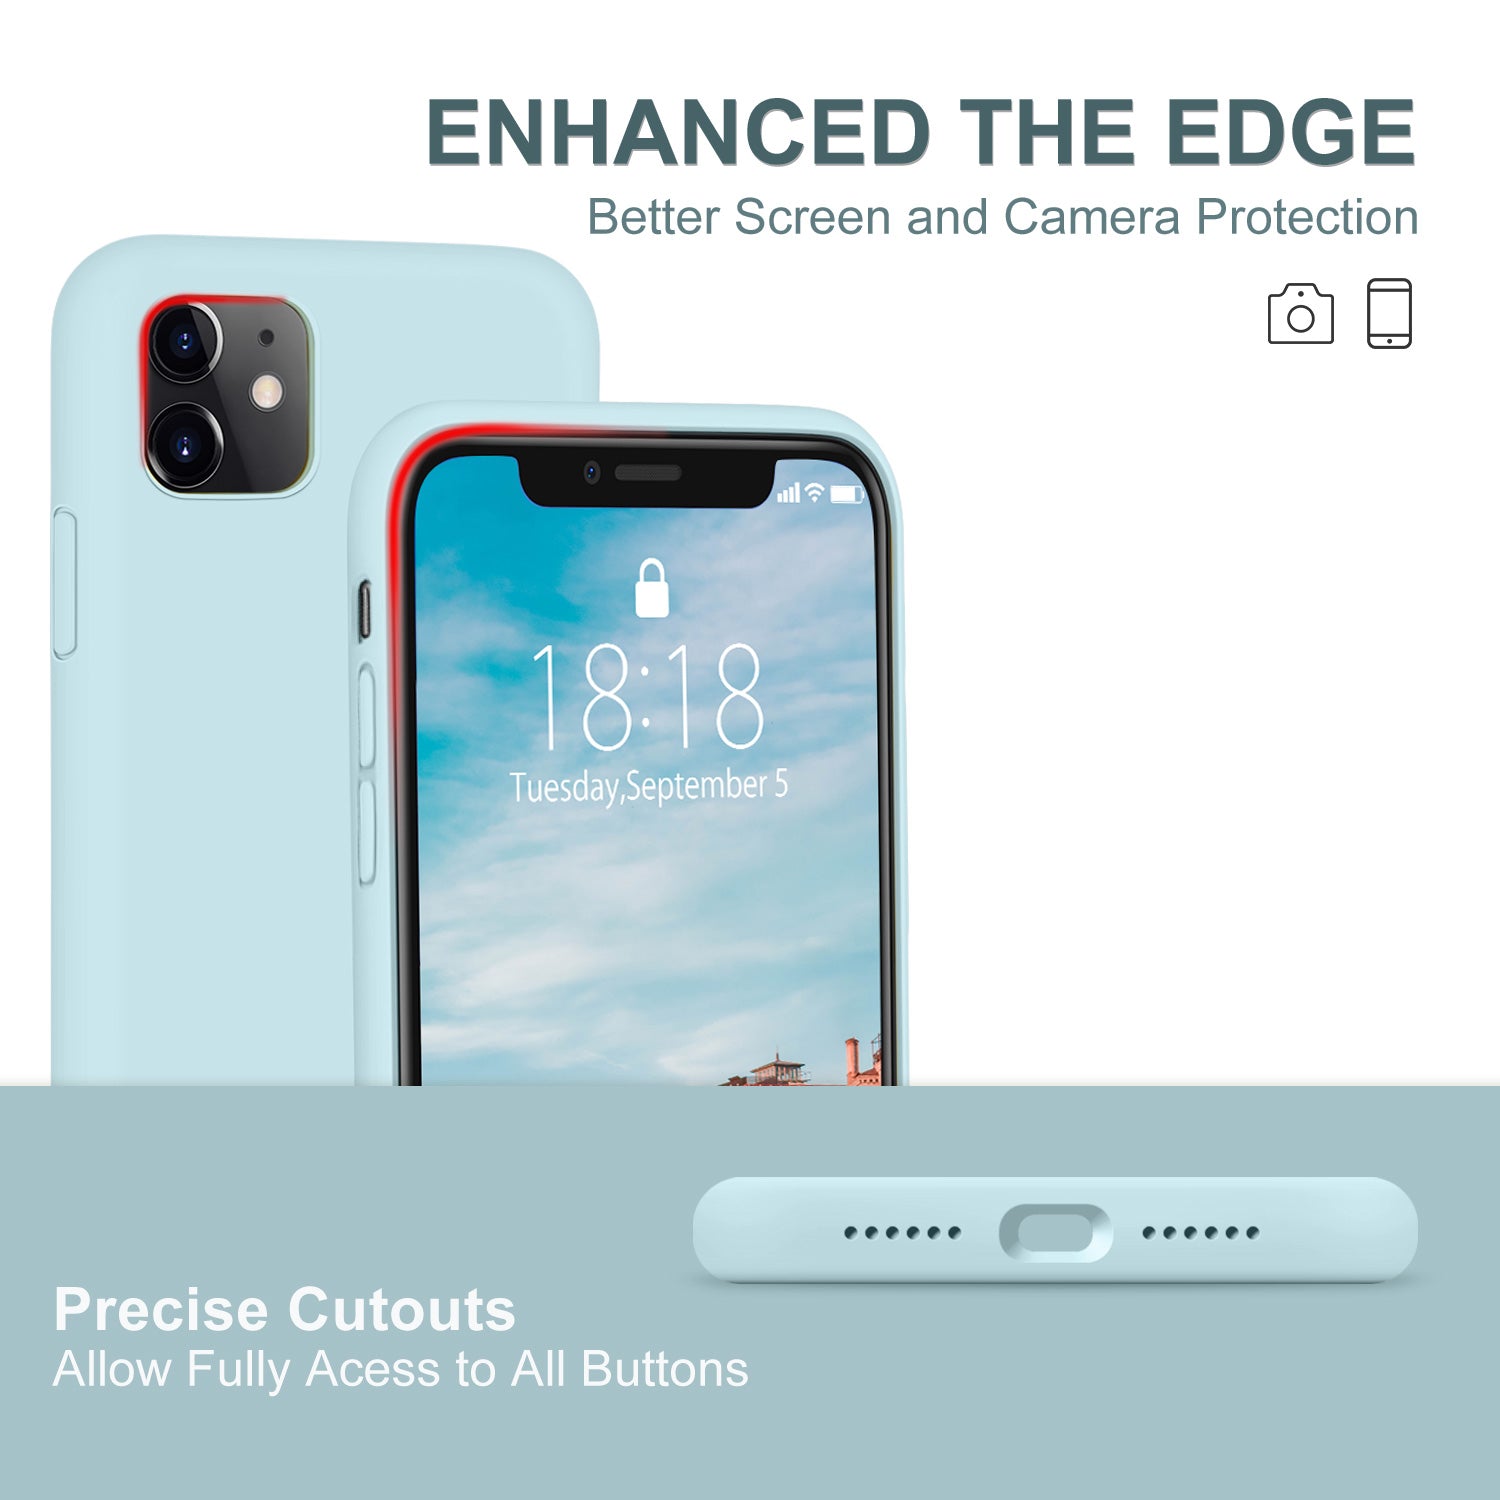 DTTO Compatible with iPhone 11 Case, [Romance Series] Full Covered Silicone Cover [Enhanced Camera and Screen Protection] with Honeycomb Grid Pattern Cushion for iPhone 11 6.1” 2019, Mint Green